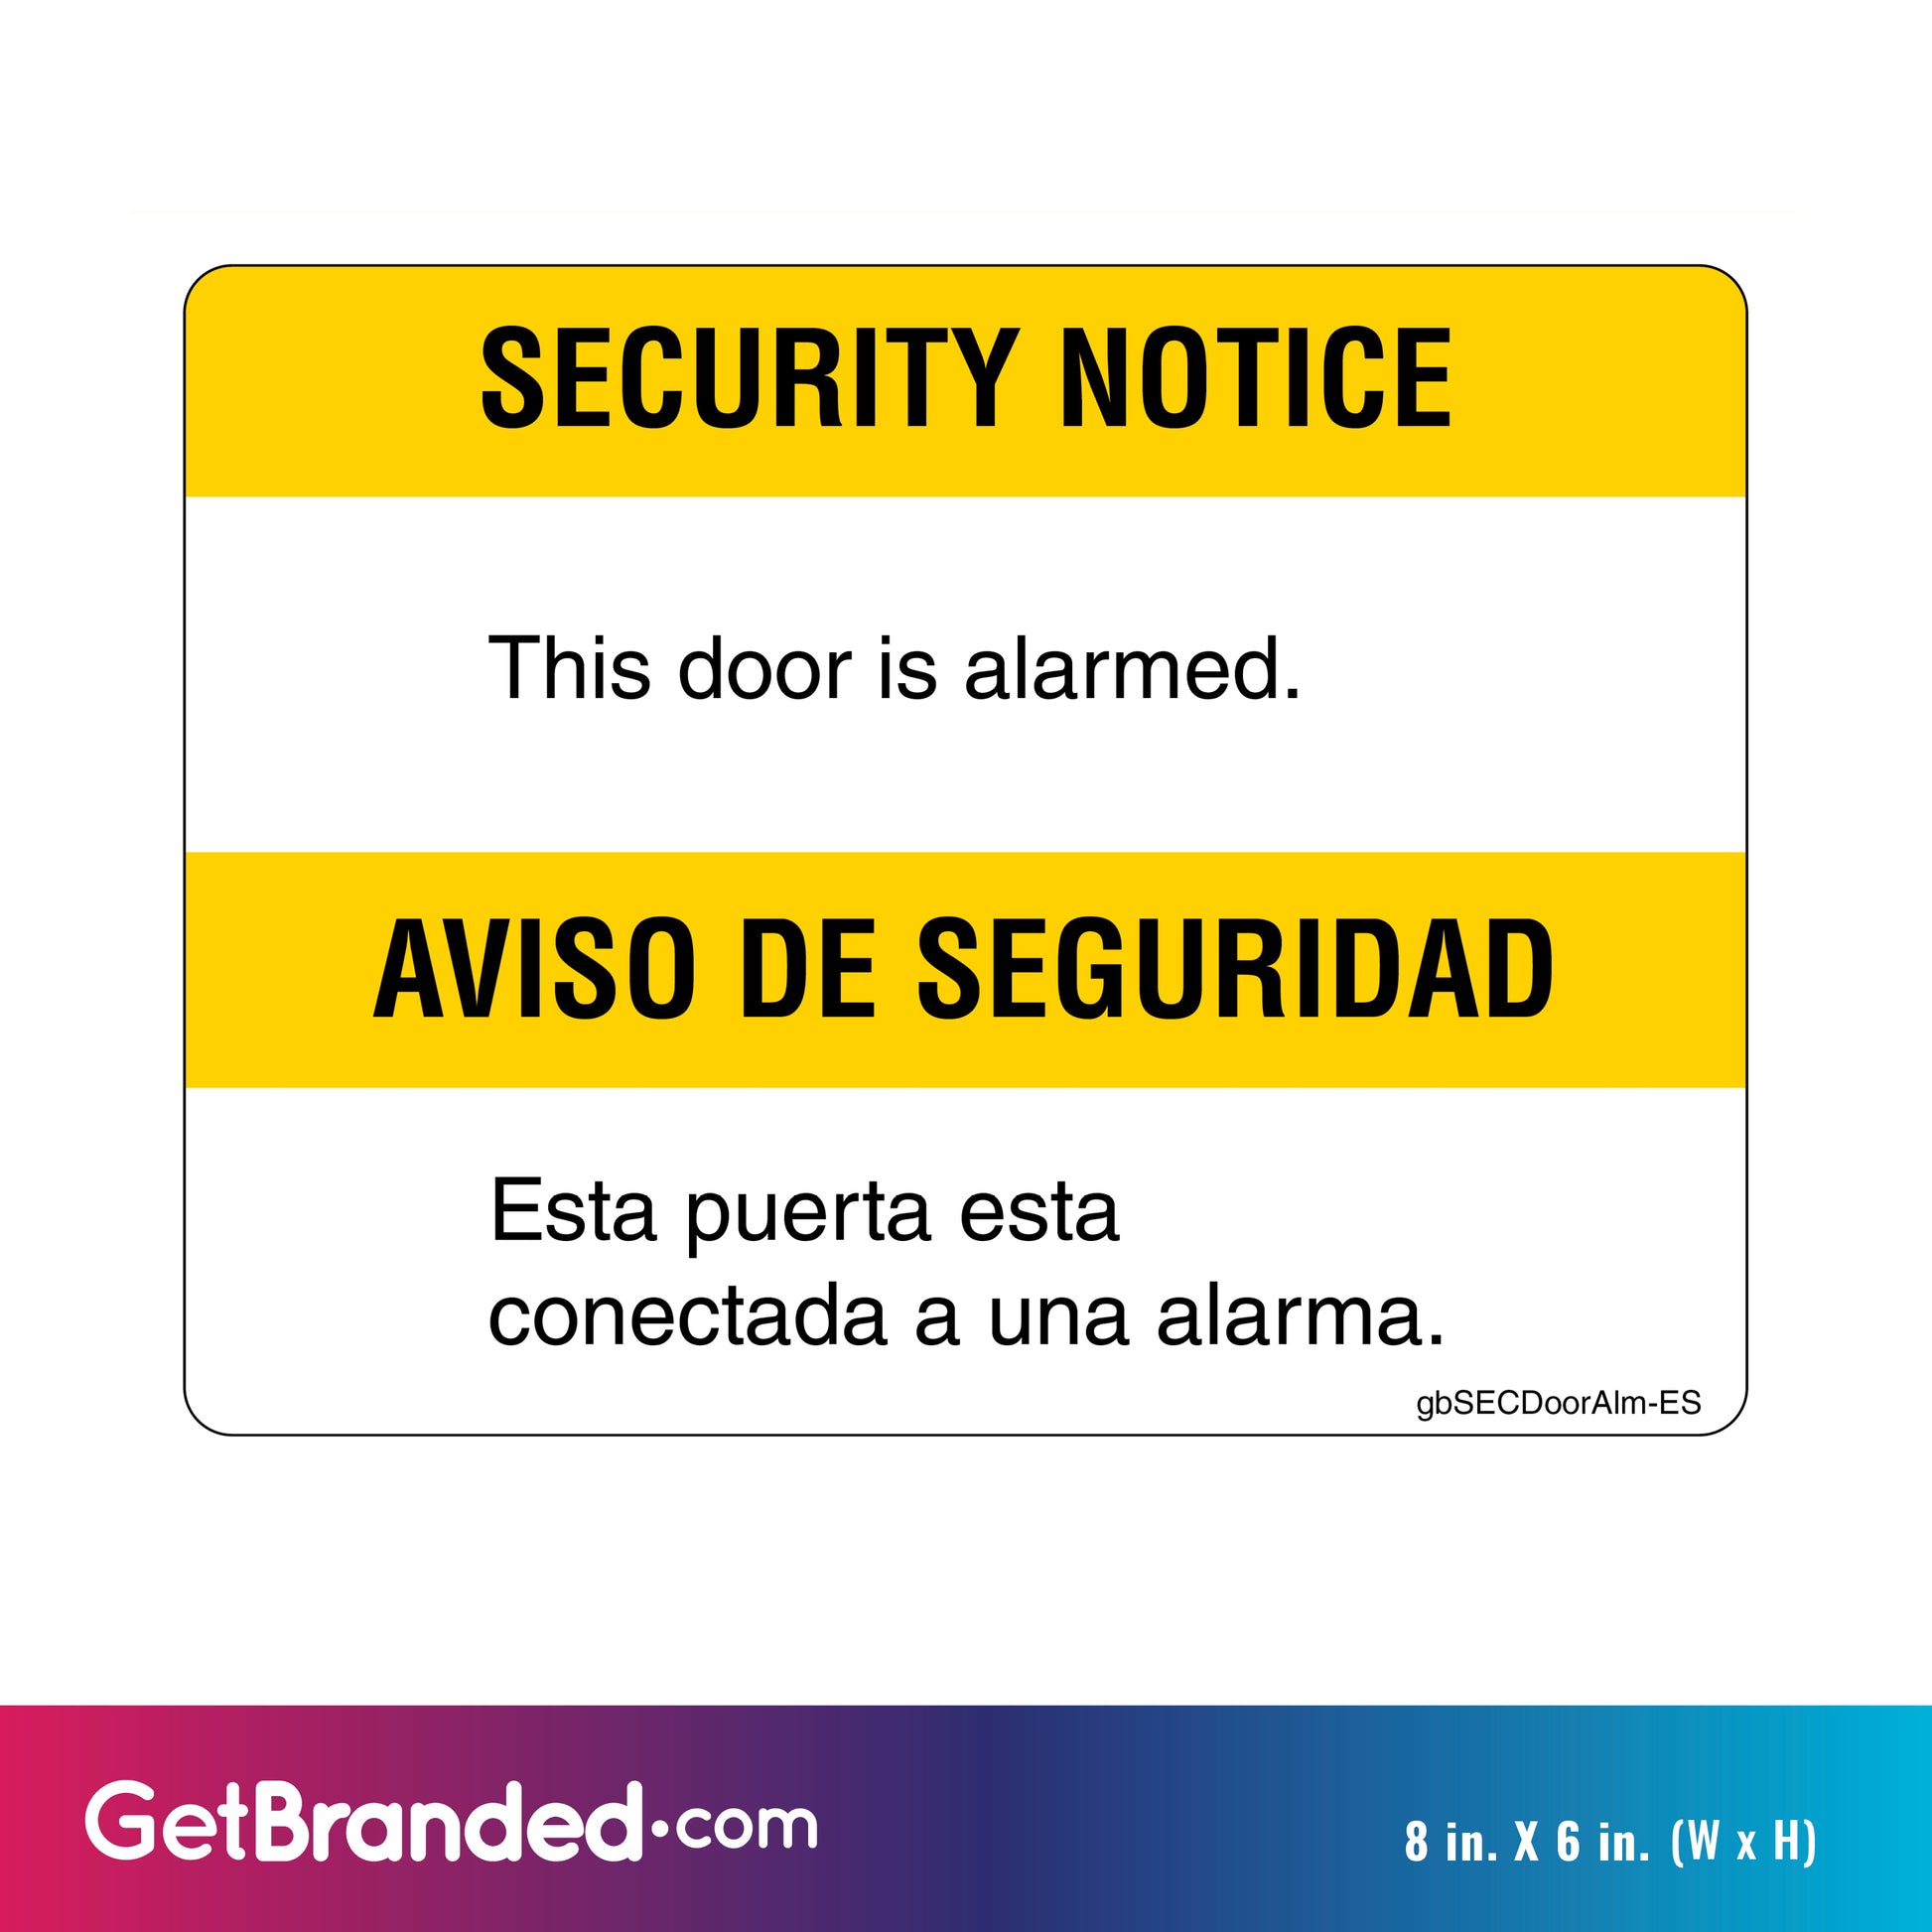 Security Notice, This Door Alarmed Decal in English and Spanish. 8 inches by 6 inches in size.